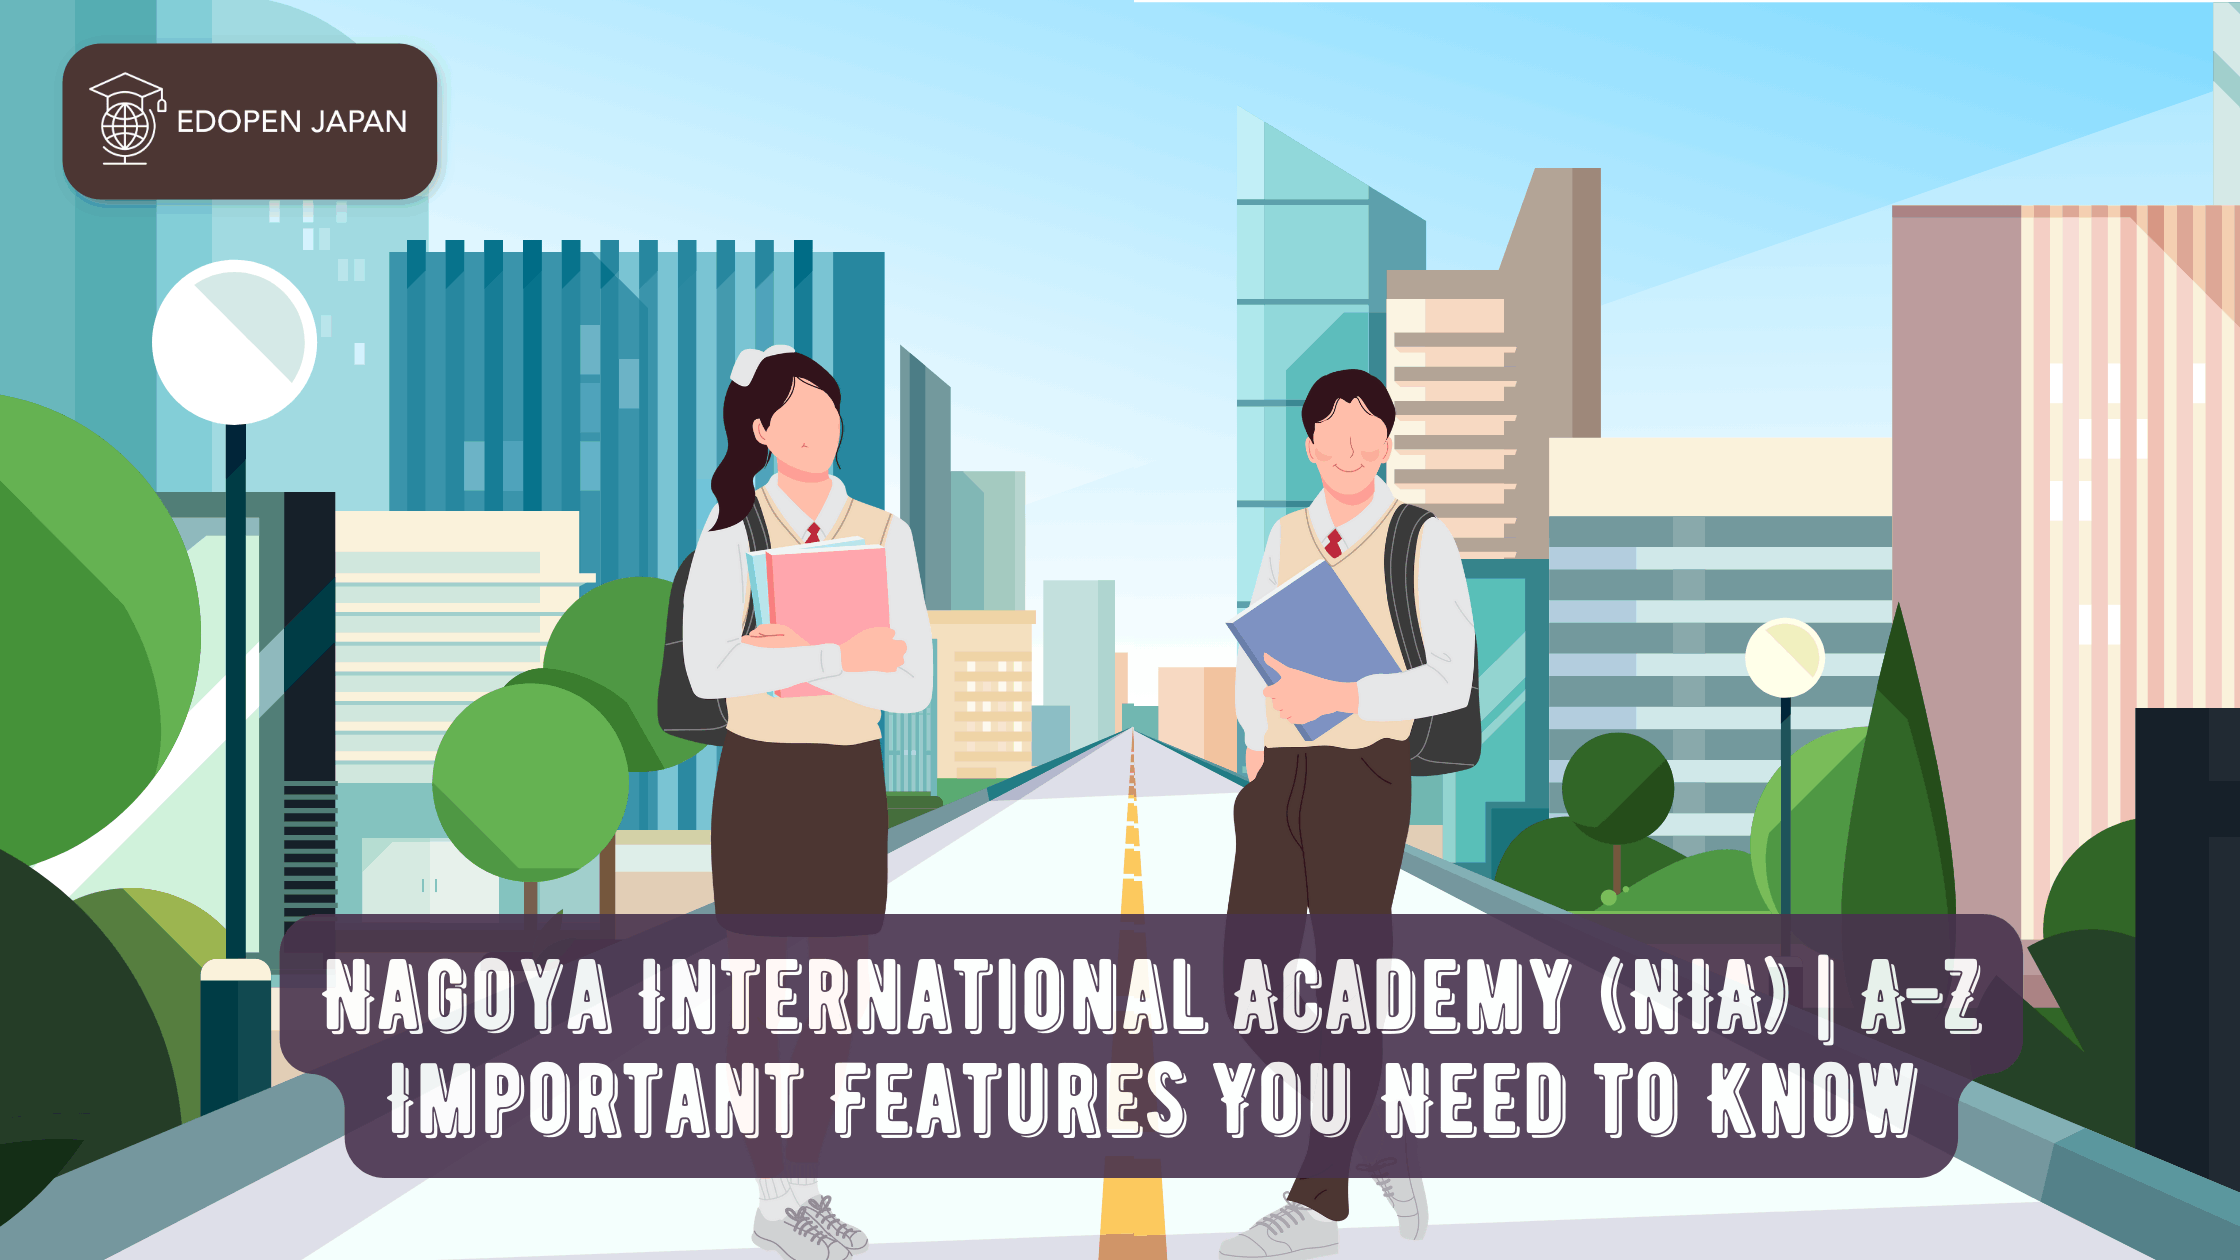 Nagoya International Academy (NIA) | A-Z Important Features You Need to Know - EDOPEN Japan